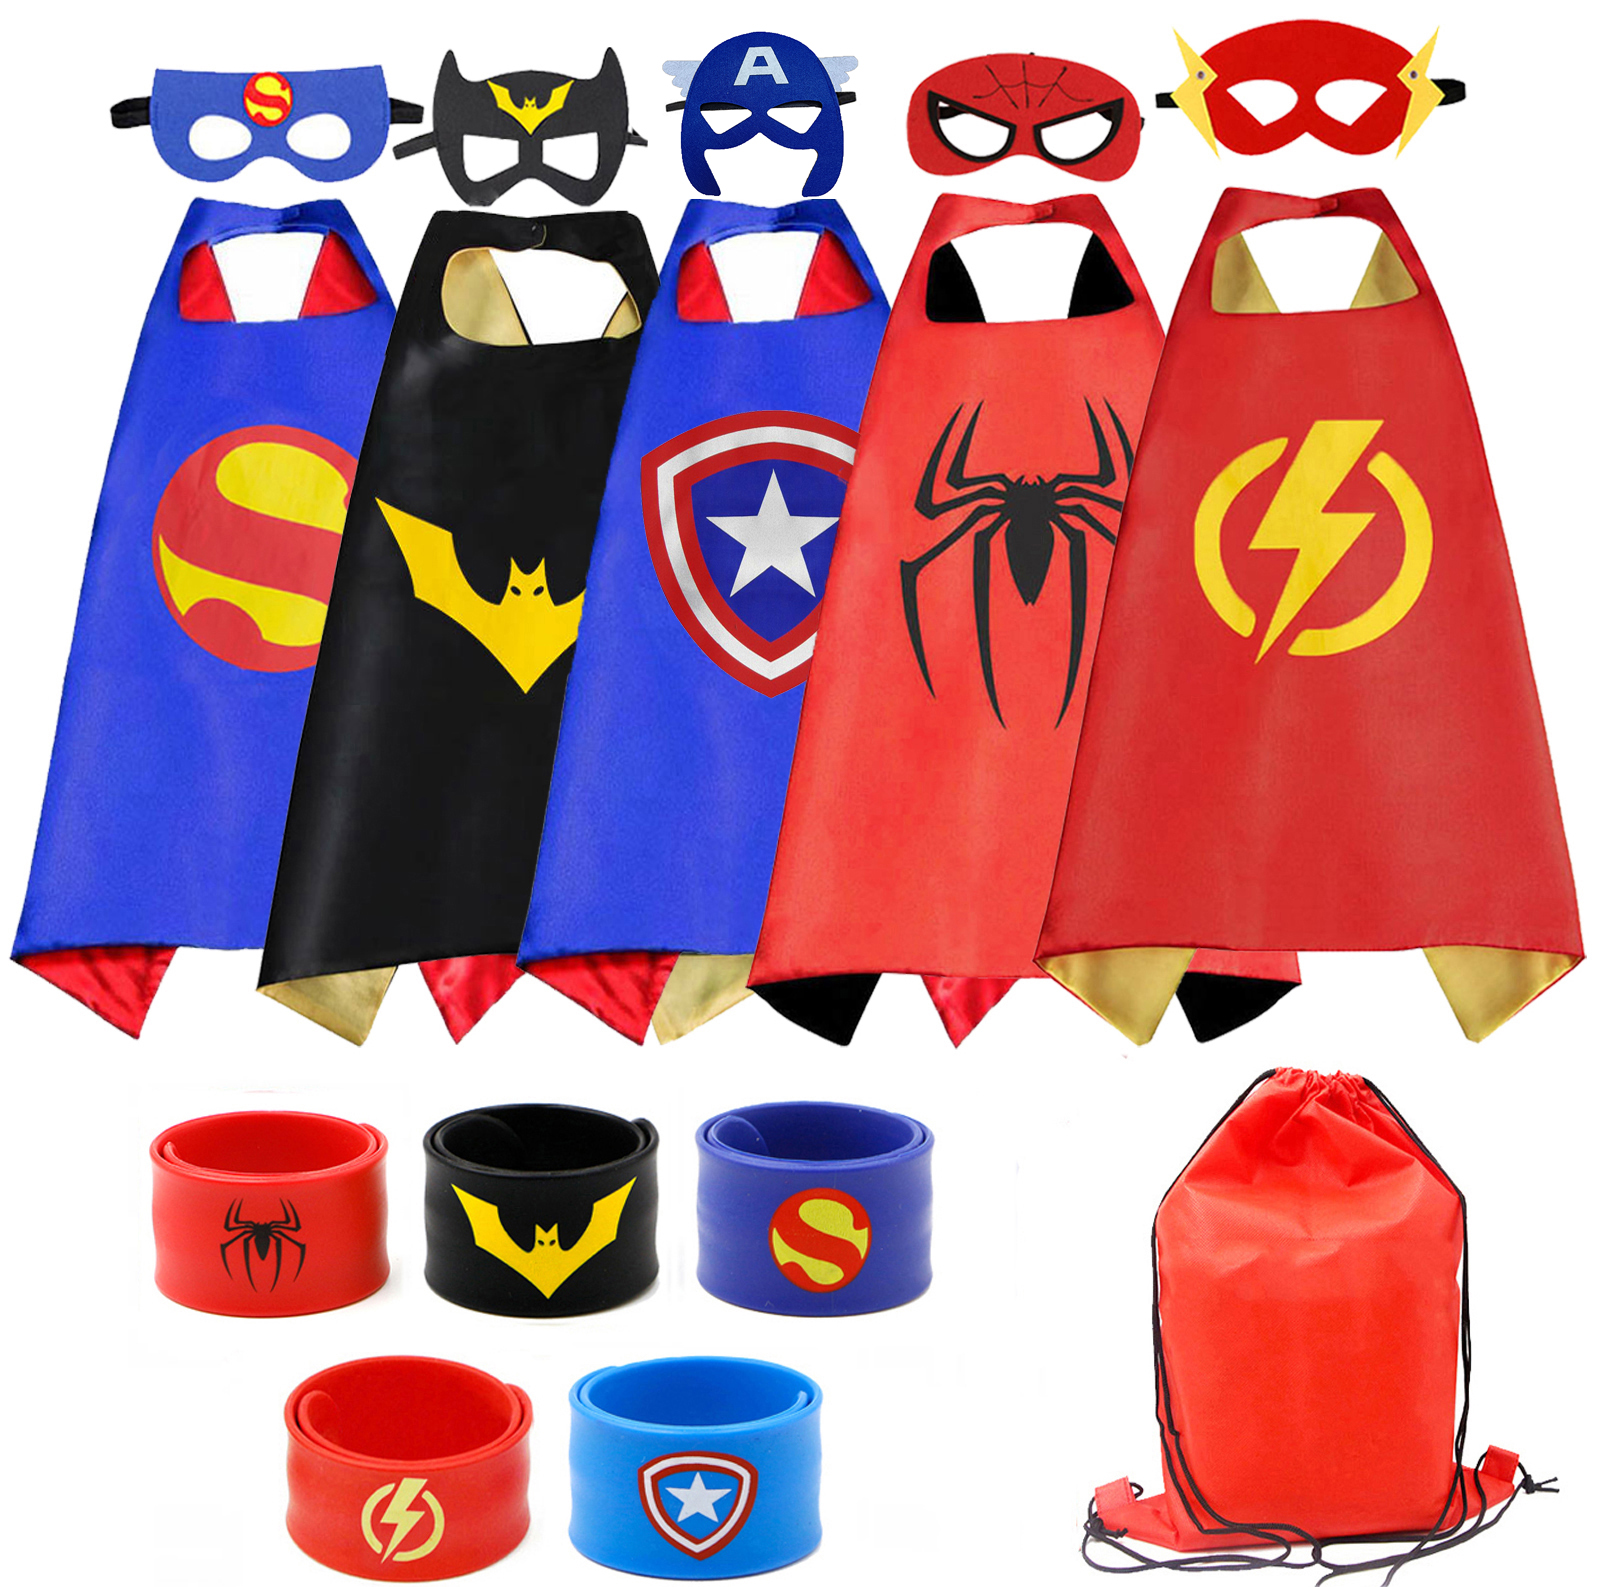 8PCS Superhero Capes for Kids,Satin Capes Set Dress Up Costumes for Party Supplies 